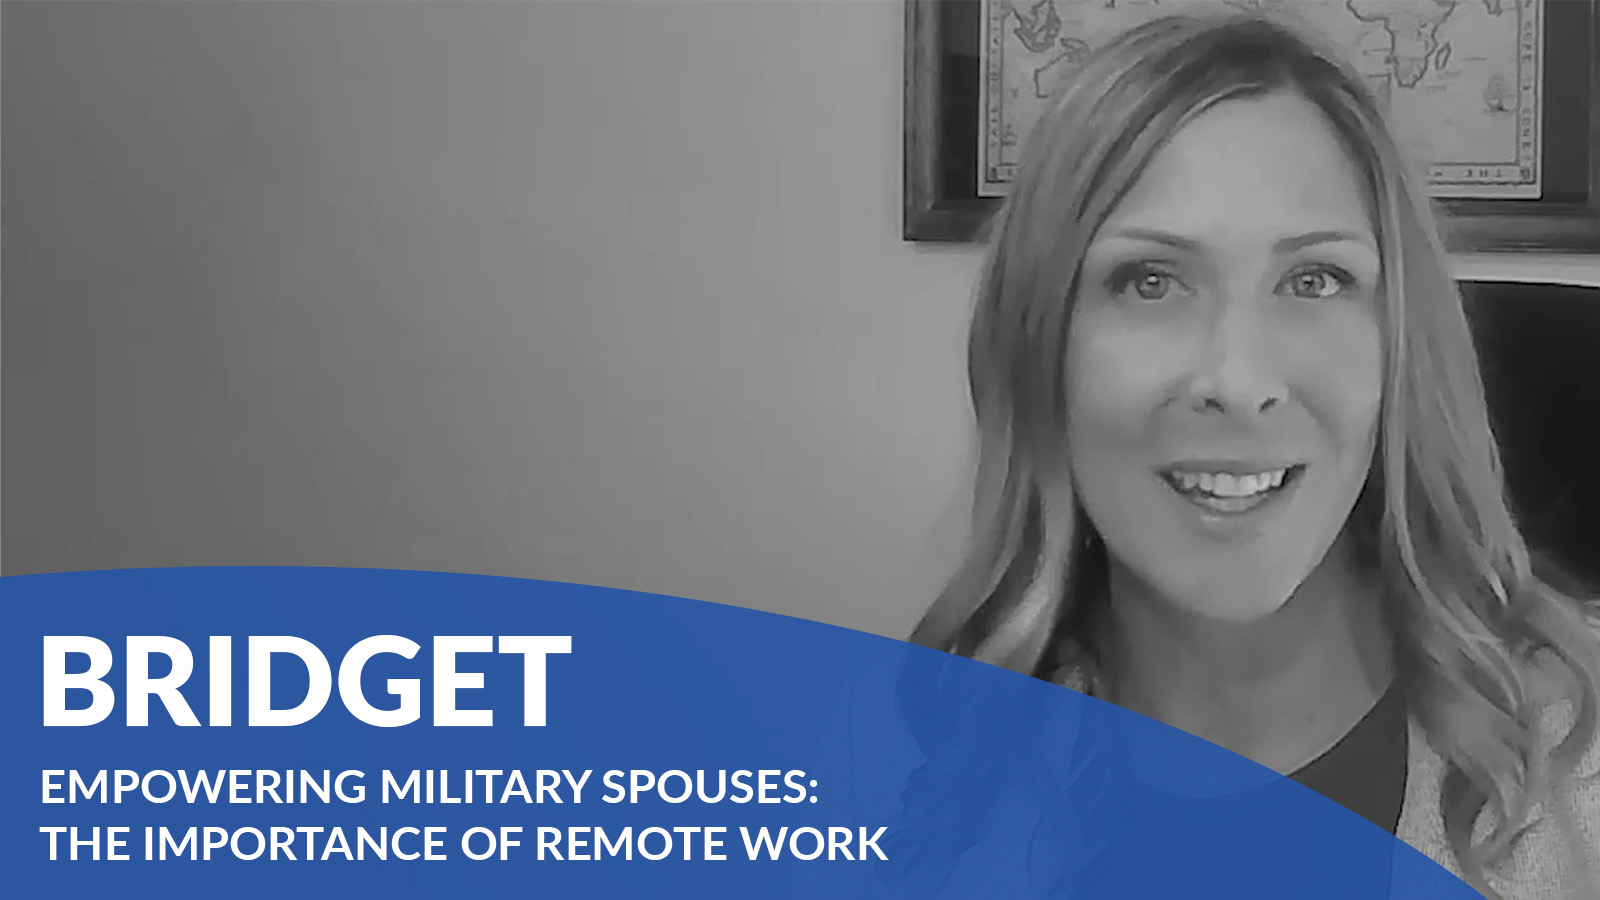 bridget's story - empowering military spouses: the importance of remote work